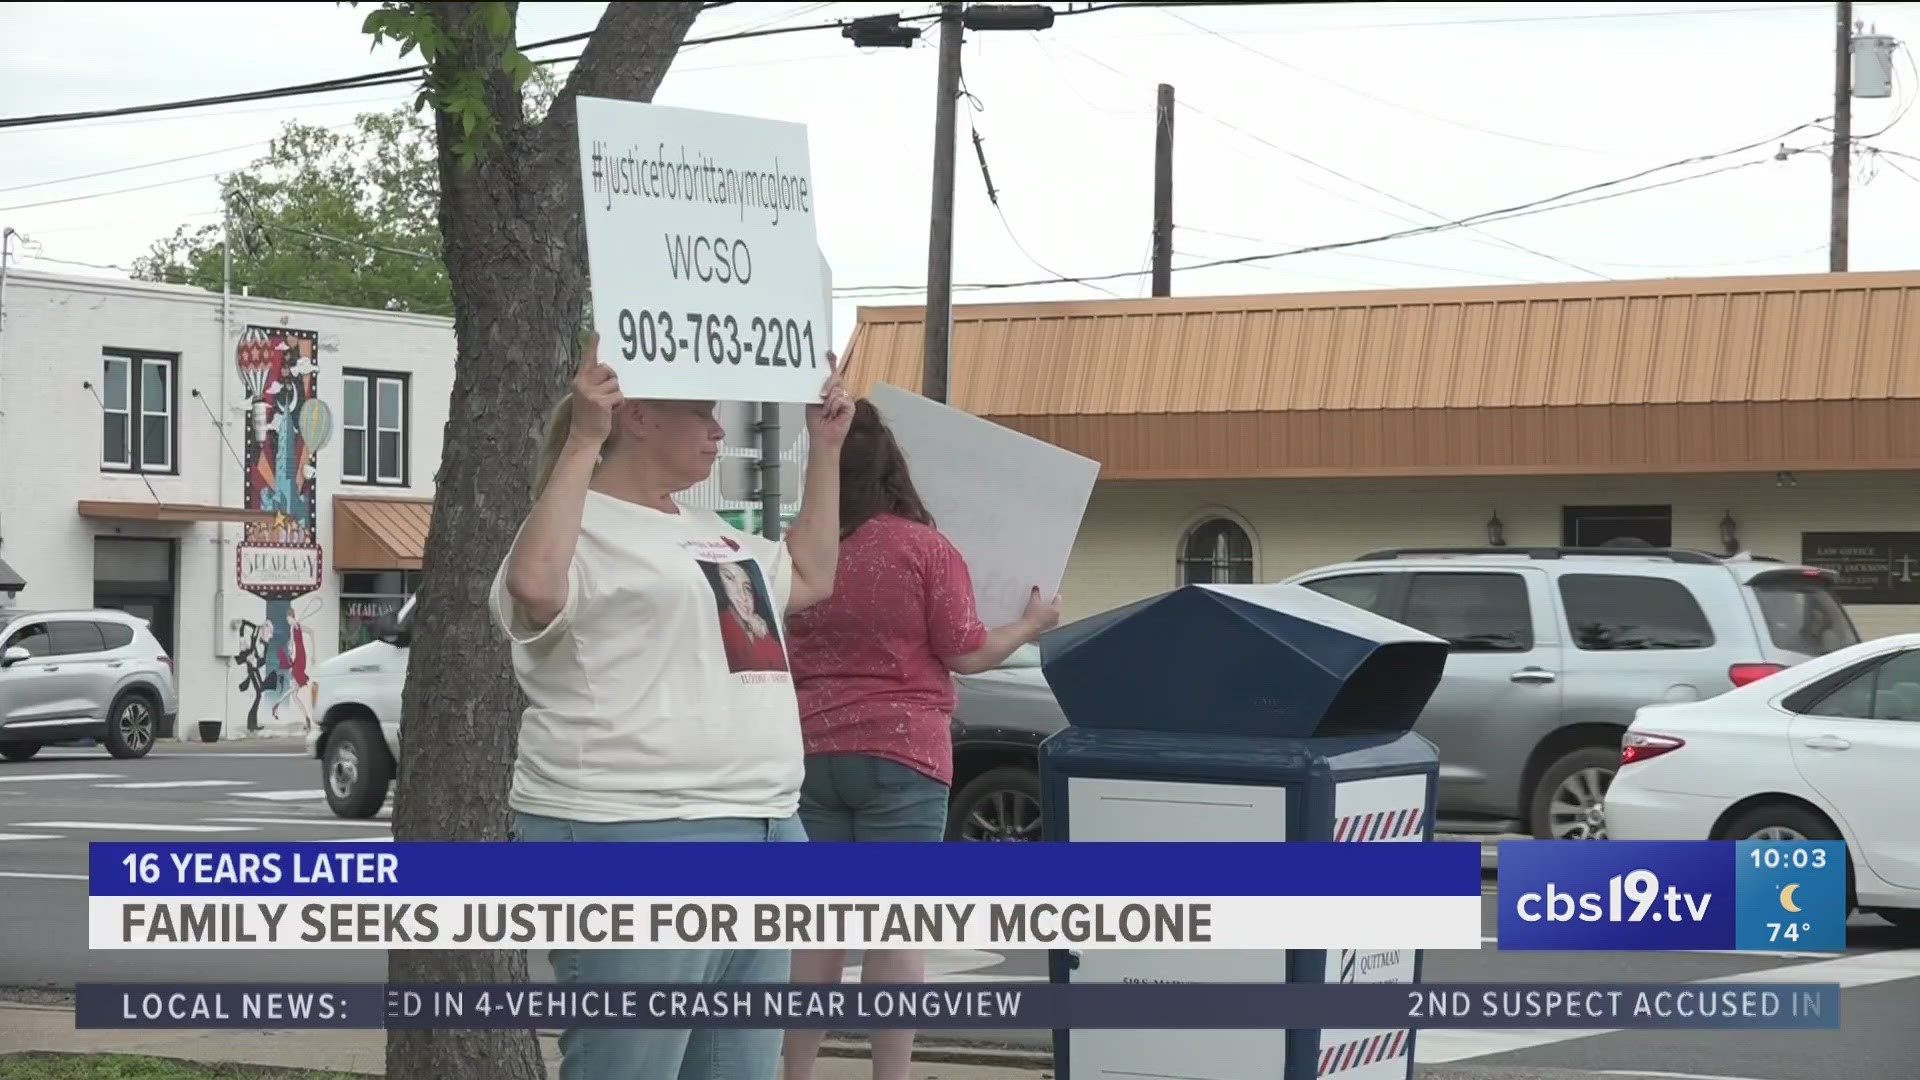 Since the accused murderer in Brittany McGlone's case was not indicted, her family continues demand answers from the Wood County government.